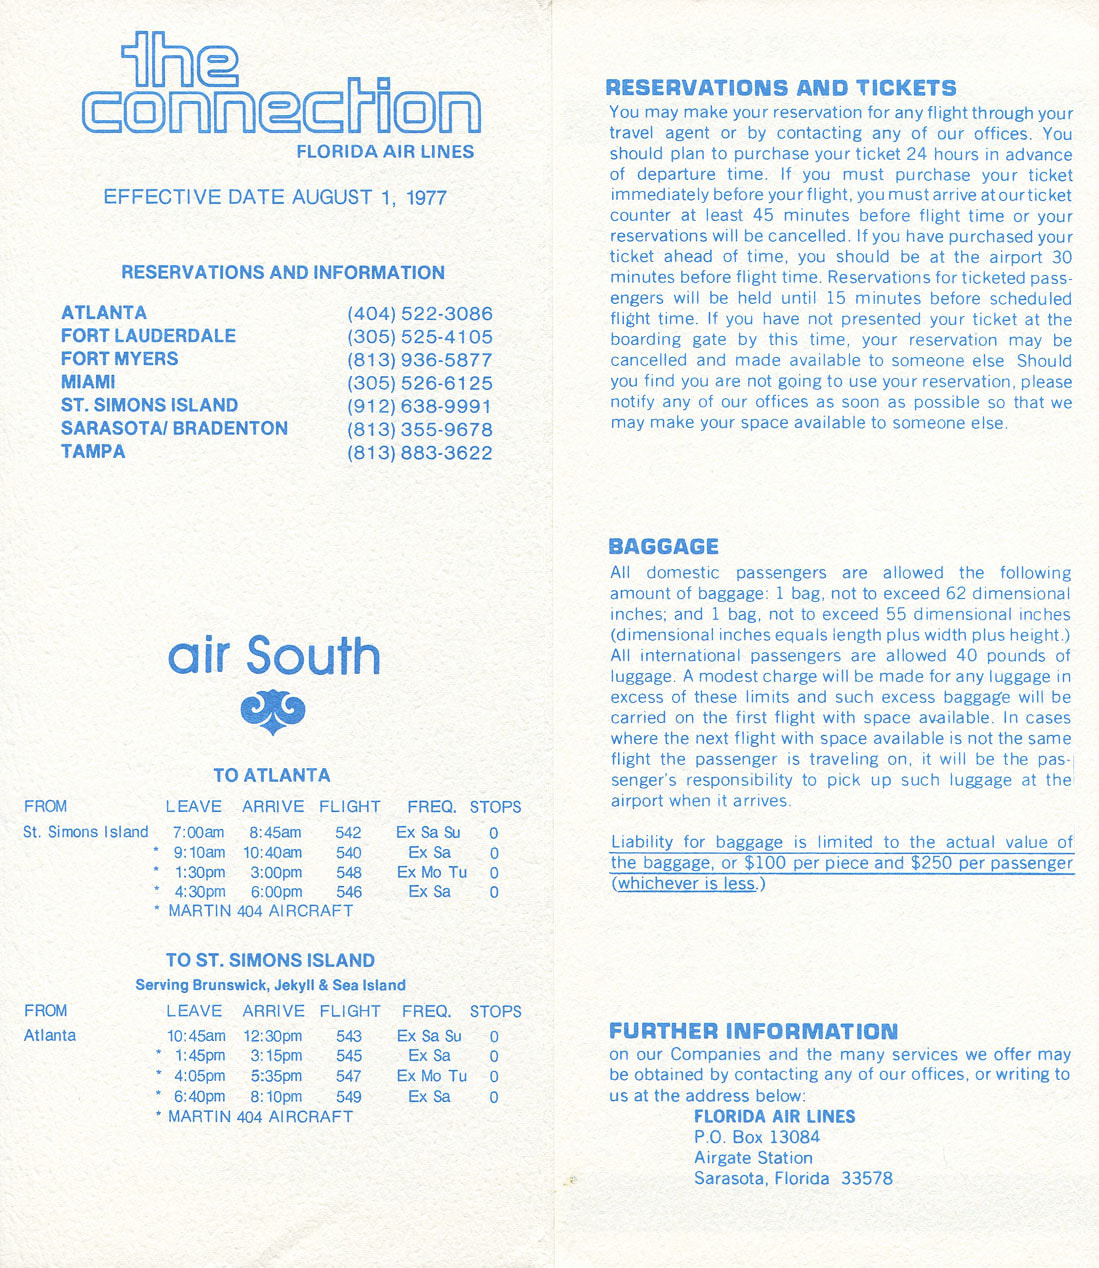 Florida Air Lines timetable